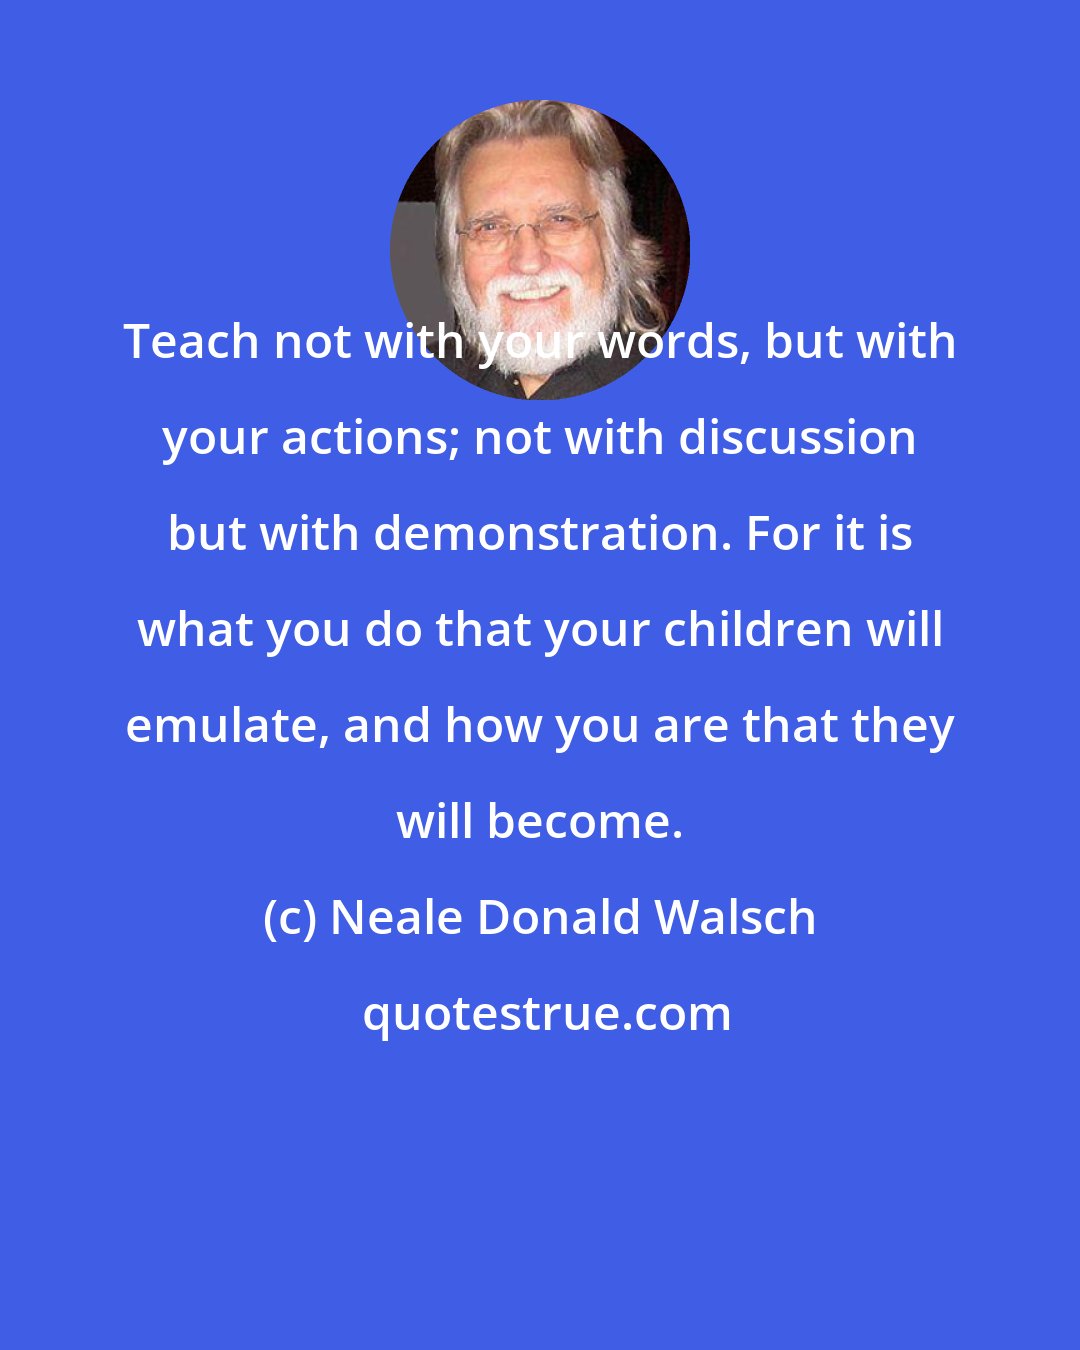 Neale Donald Walsch: Teach not with your words, but with your actions; not with discussion but with demonstration. For it is what you do that your children will emulate, and how you are that they will become.